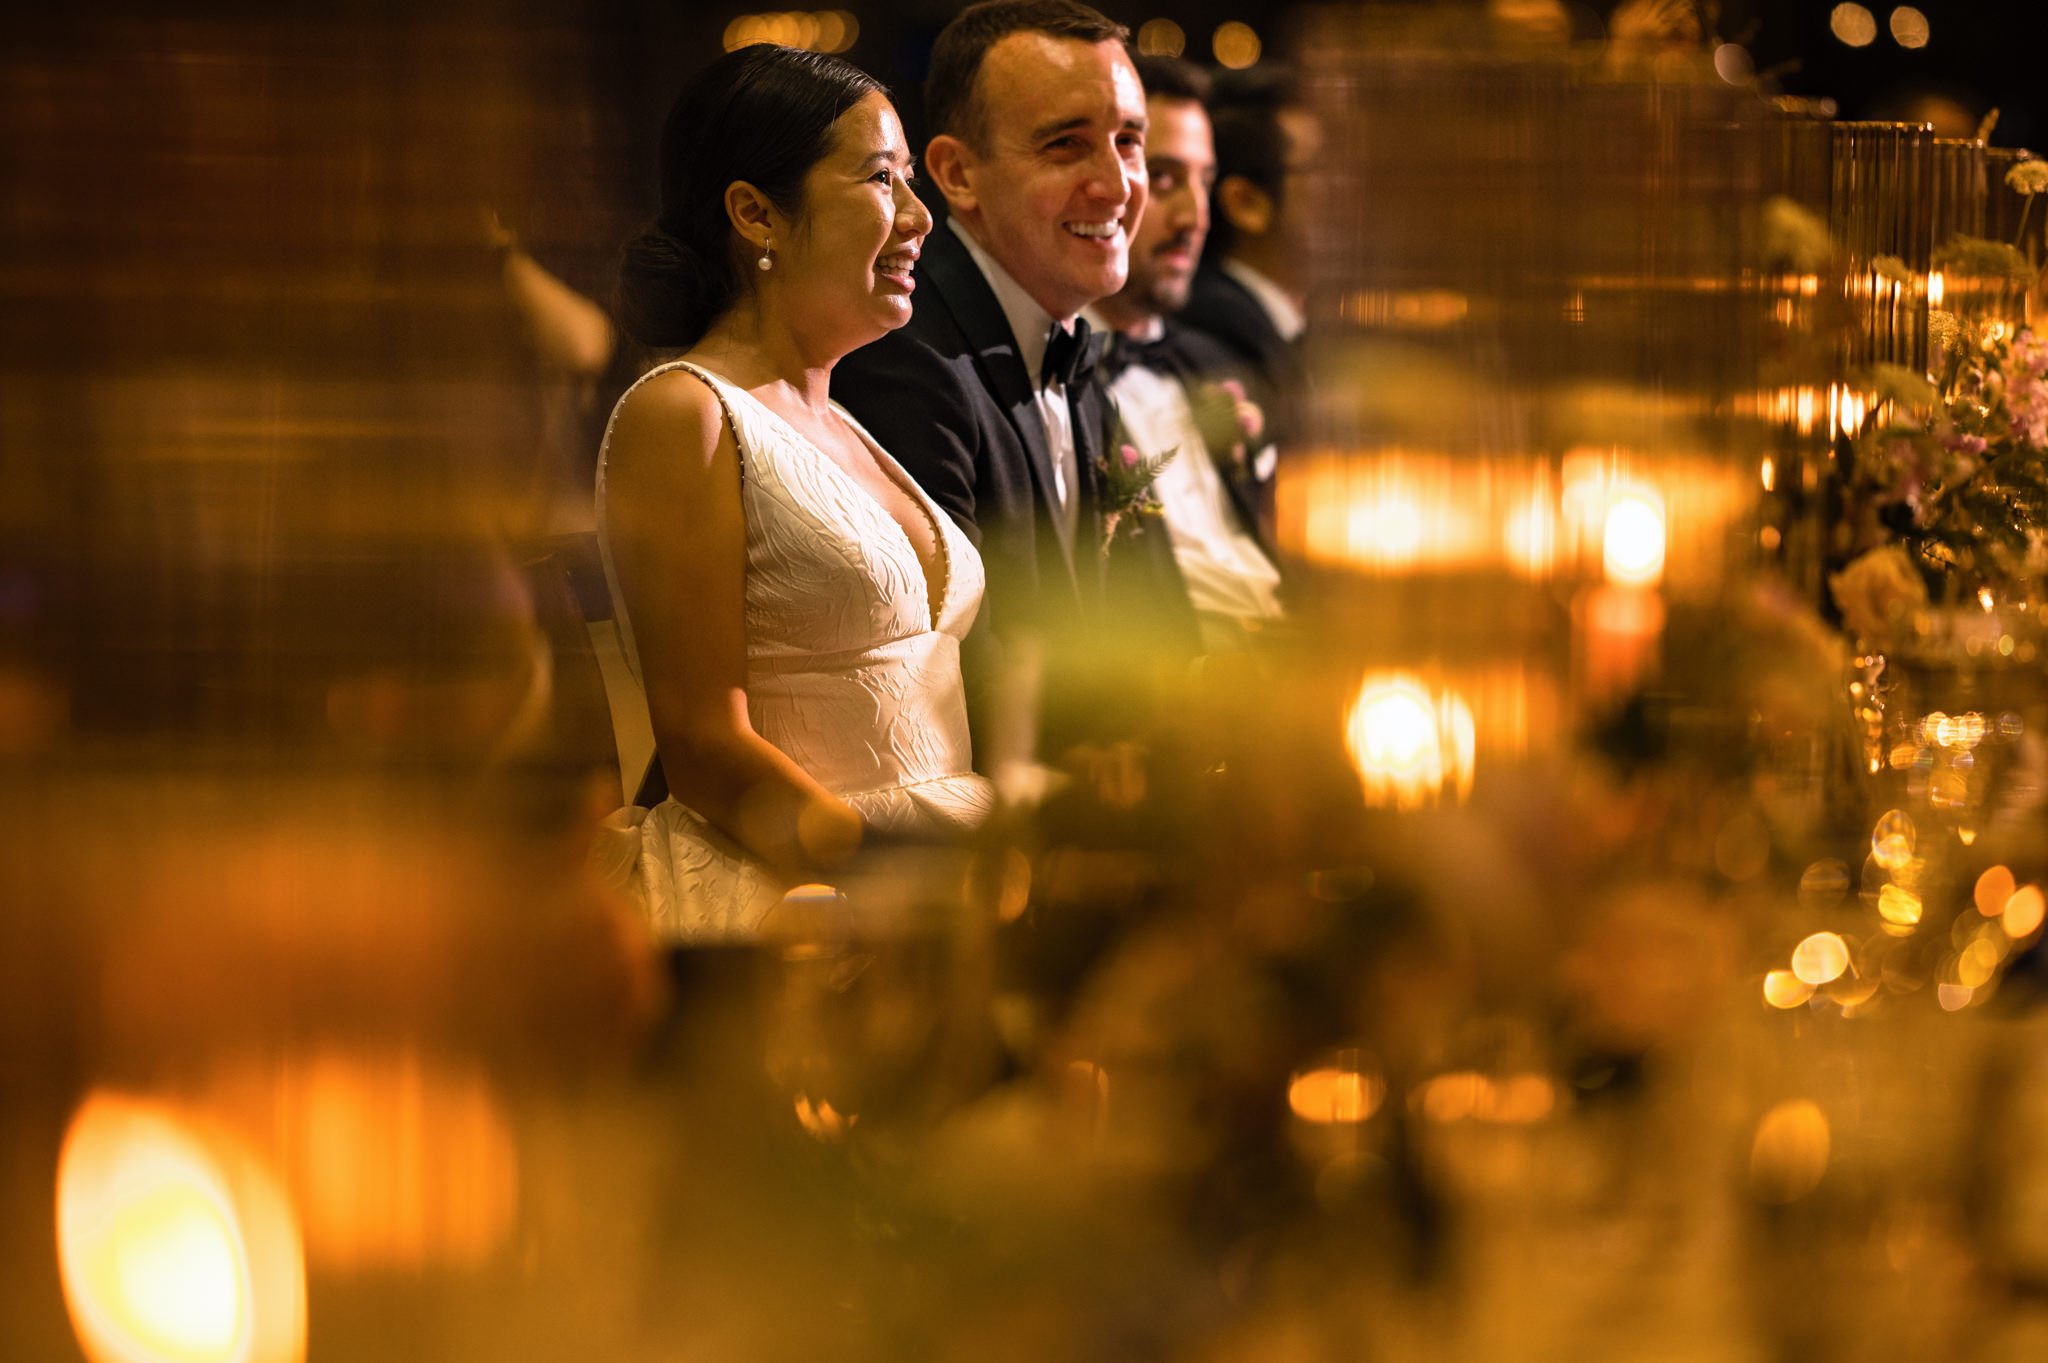 A smiling bride and groom at an old Edwards wedding reception.